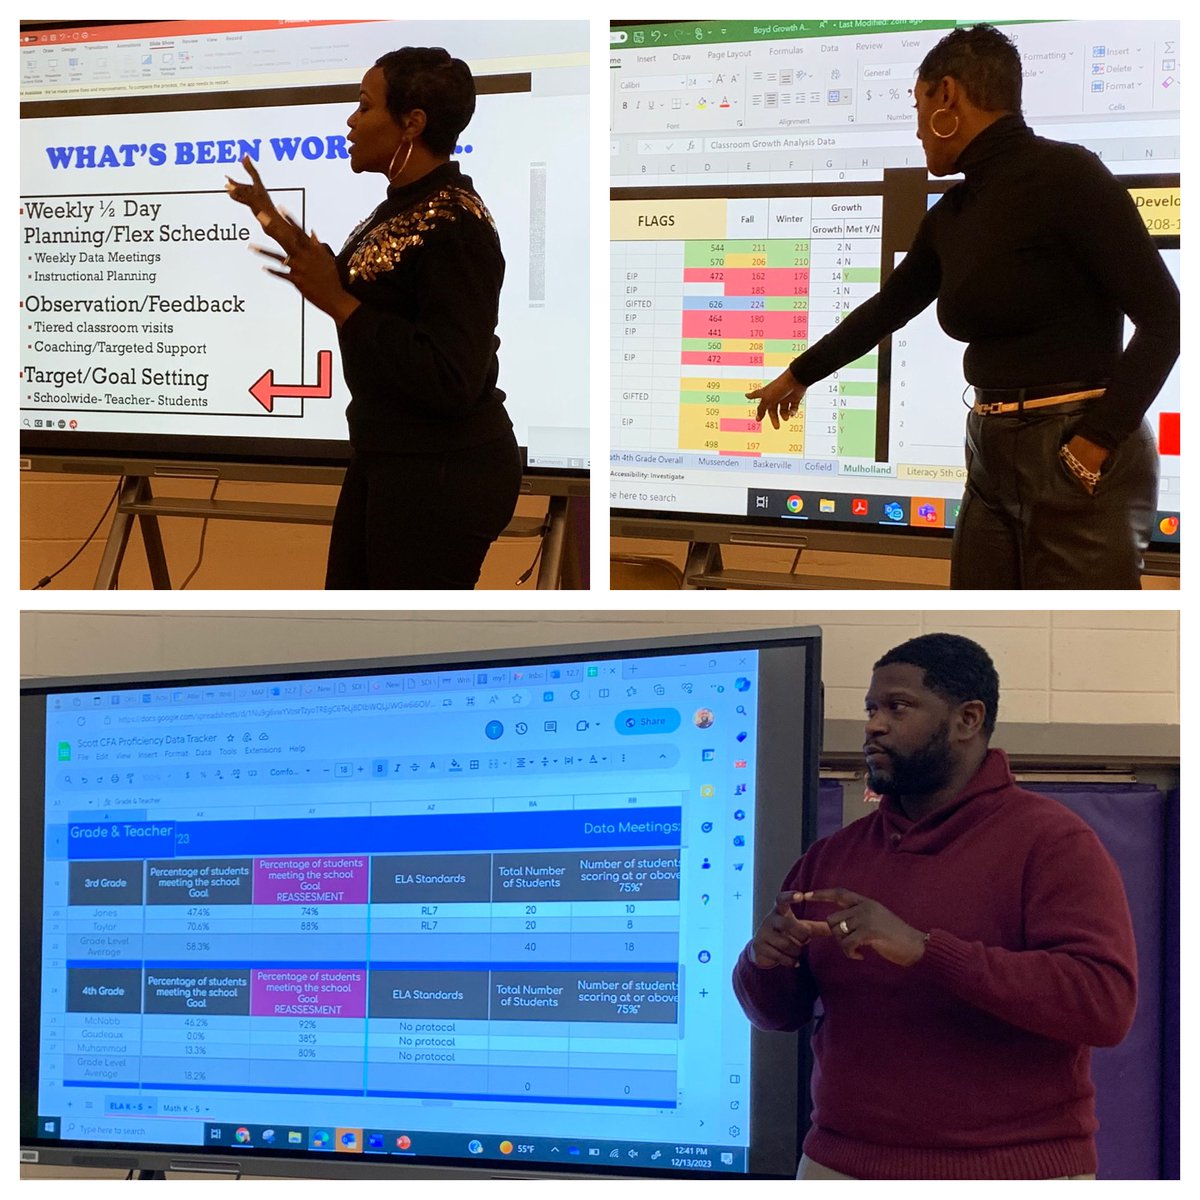 Thank you @DrTSpencer @BoydPrincipalK and Principal Longley for sharing promising practices that are yielding gains. 📈🙏🏿🤗 #WinningSeason @apsupdate @apssupt @CrystalJanuary @forrest_taylor1 @MrGuilford_SHMS @PrincipalRogers @JLIADavis_APS